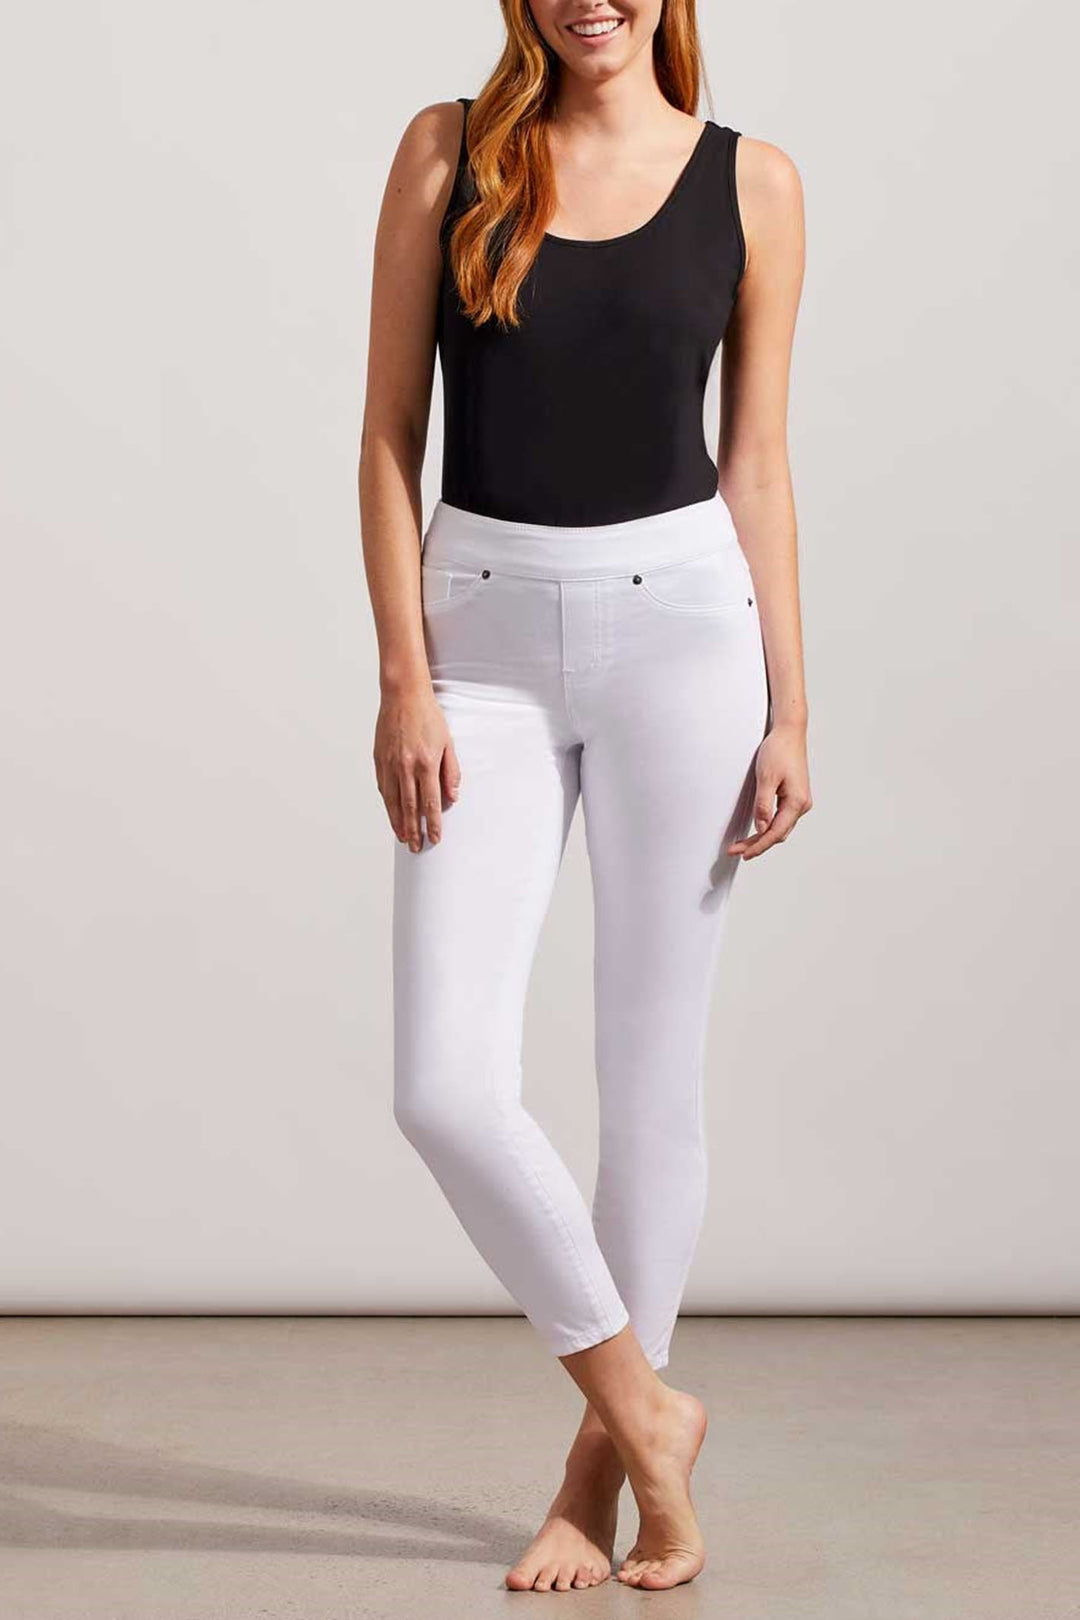 Tribal 7570O Audrey White Pull-On Ankle Jegging Trousers - Experience Boutique